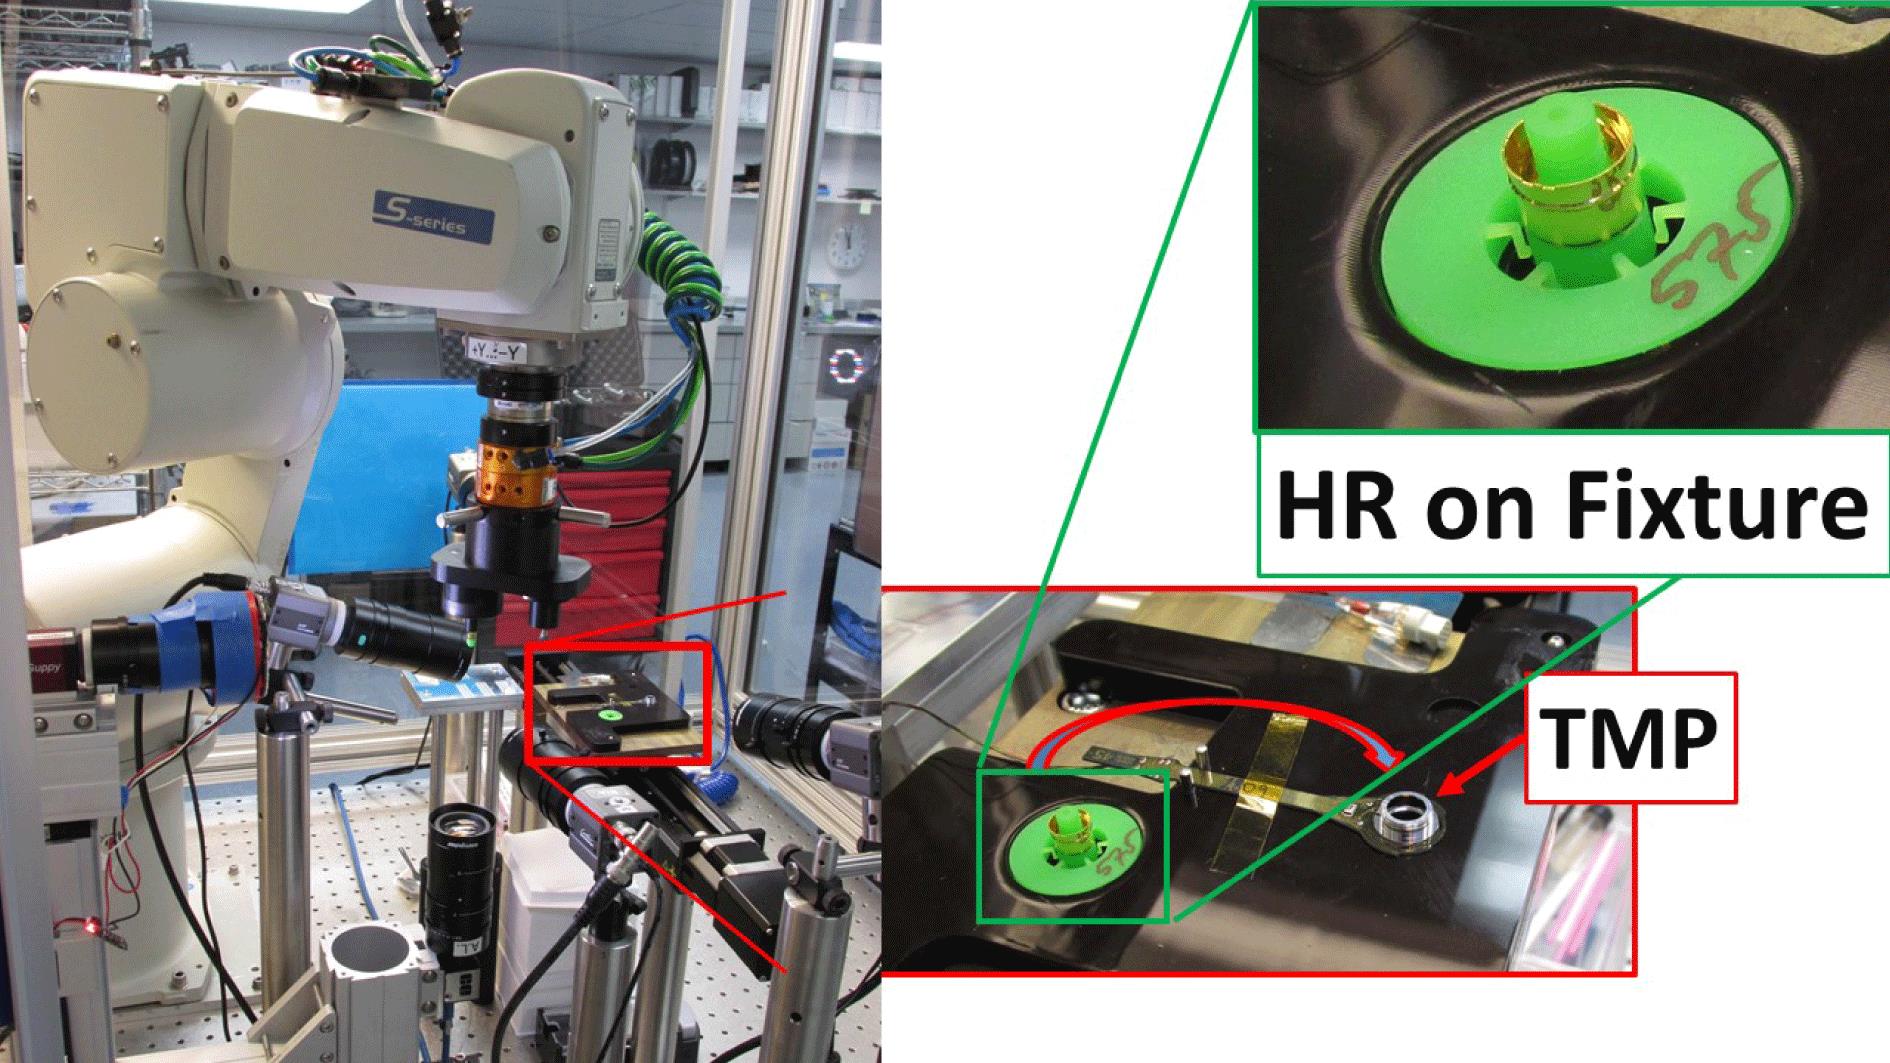 The robot cell used for the work presented in this paper is depicted on the left. On the right, in the zoomed-in images, the components to be assembled are shown.